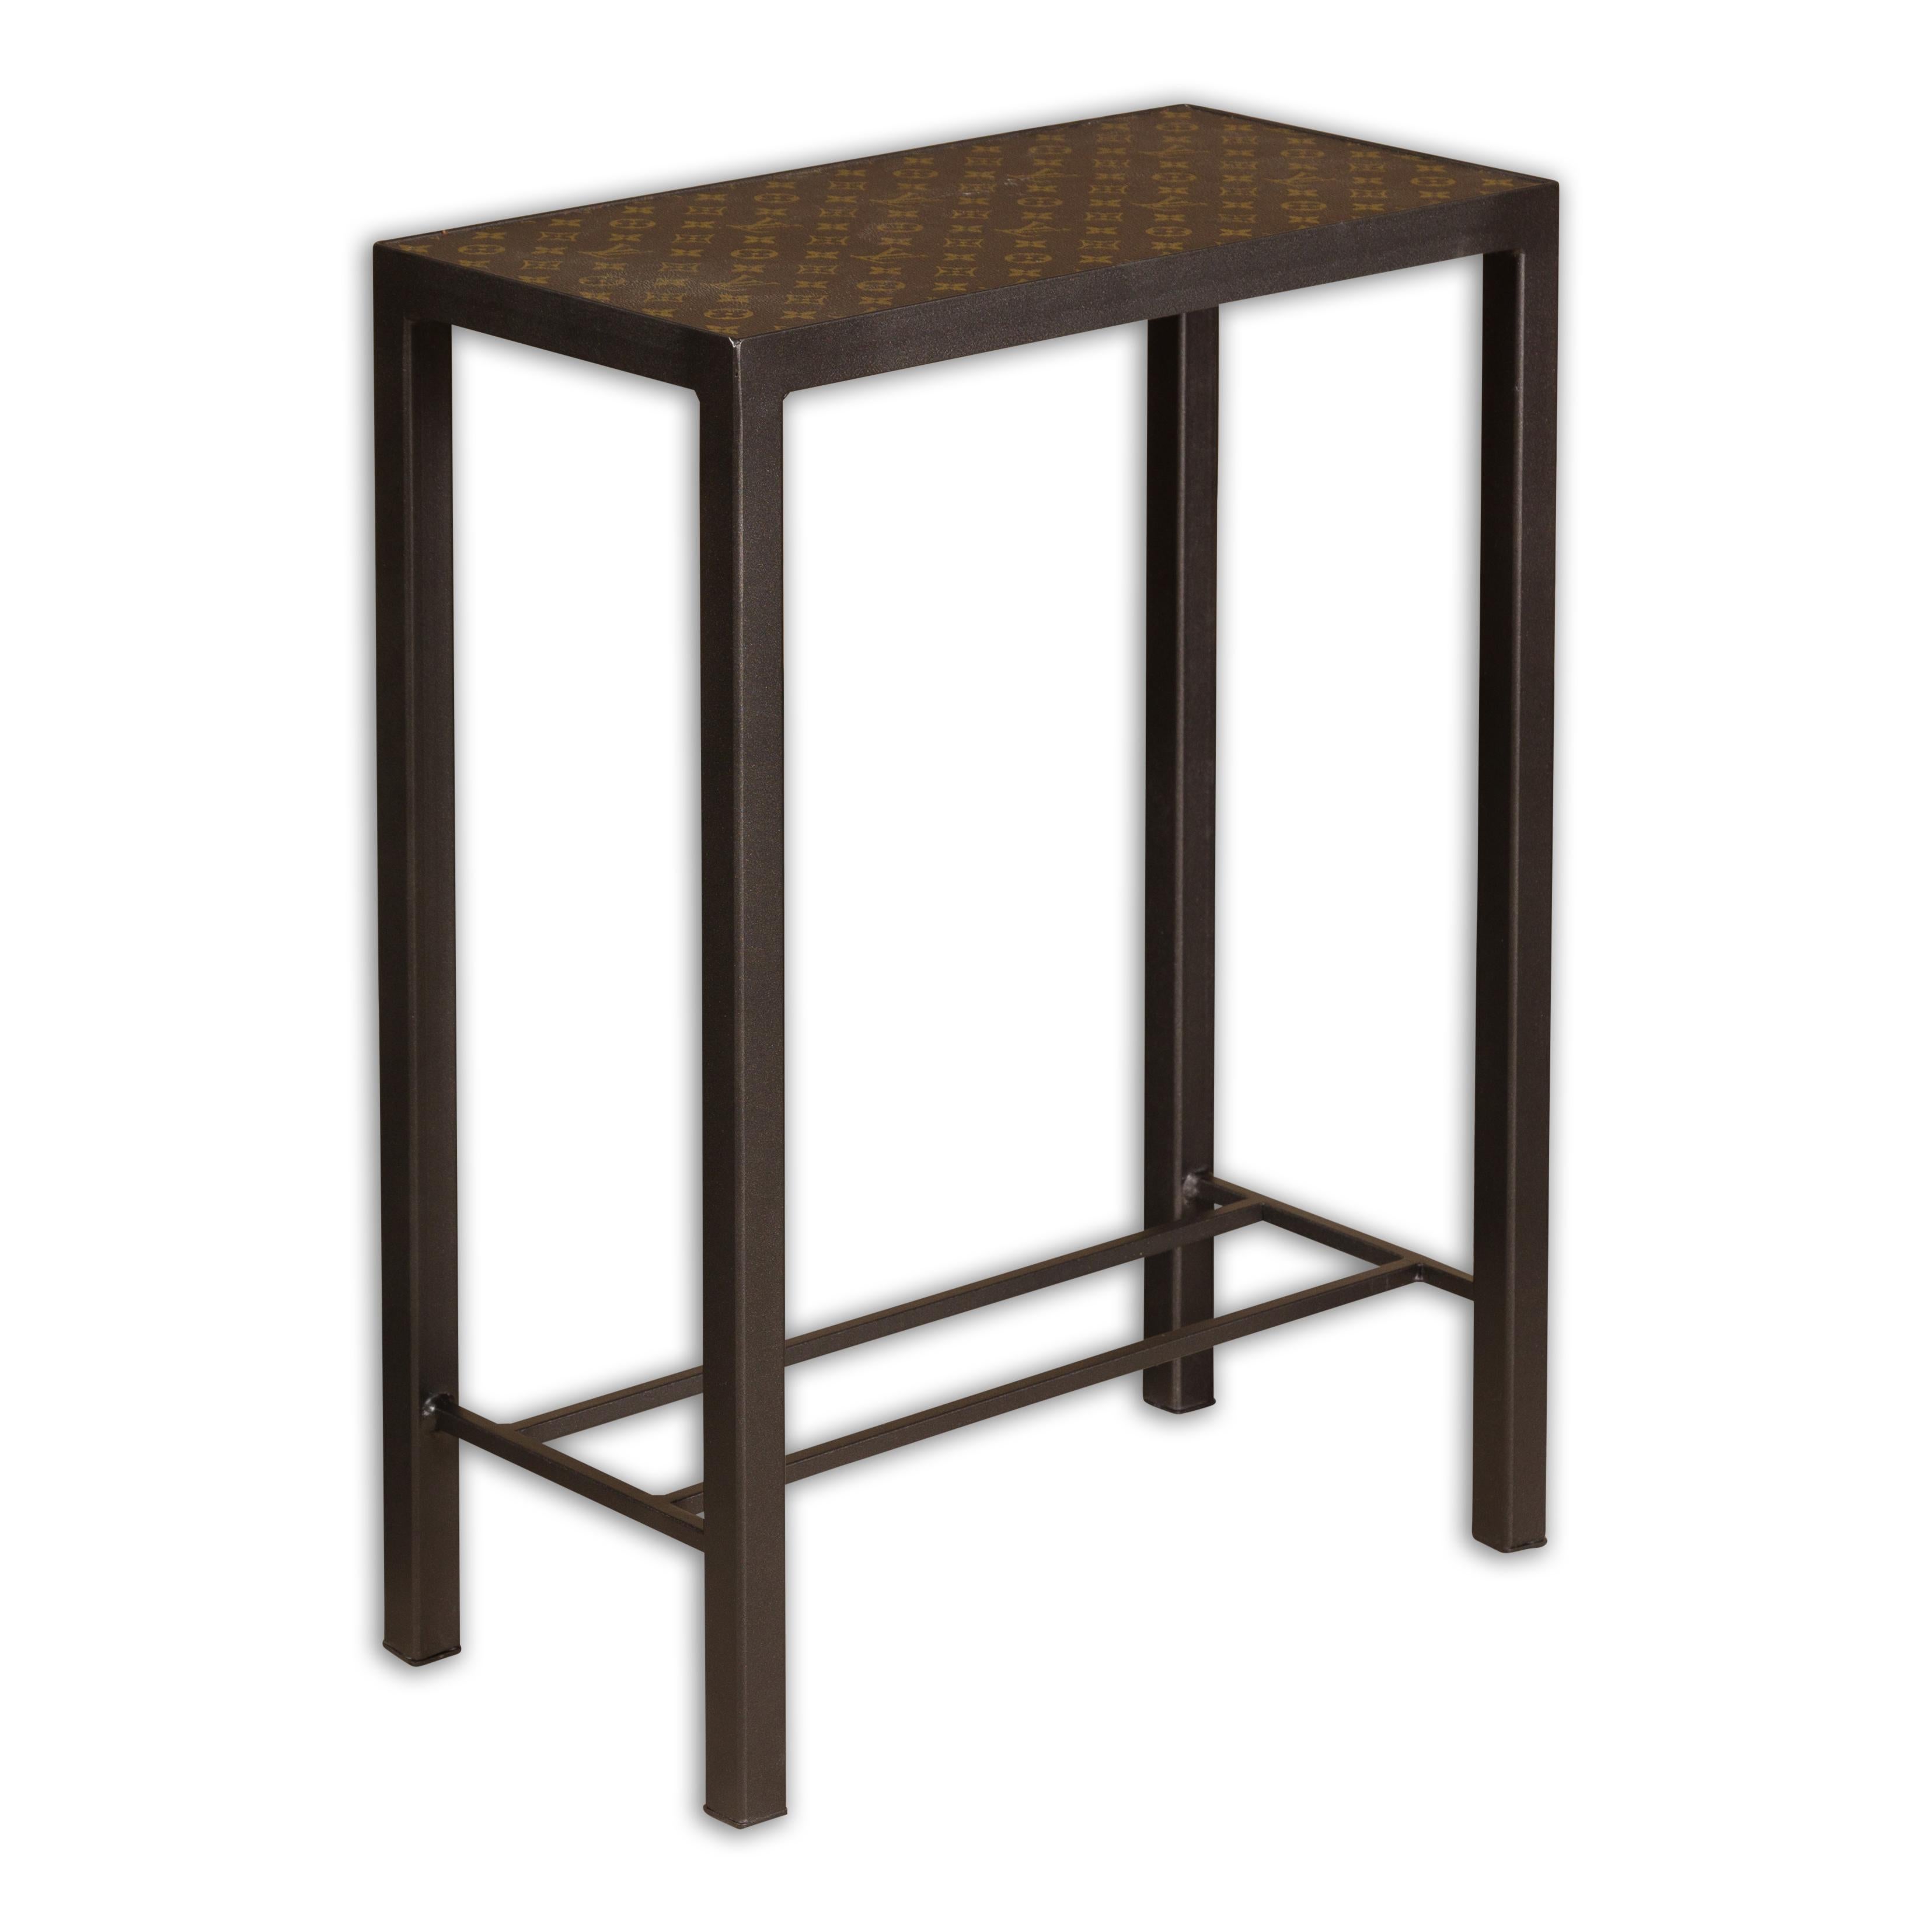 A narrow side table made of a Louis Vuitton leather top, mounted on a custom metal base. Step into a world of refined luxury with this exquisite narrow side table, featuring a top crafted from authentic Louis Vuitton leather, seamlessly mounted on a